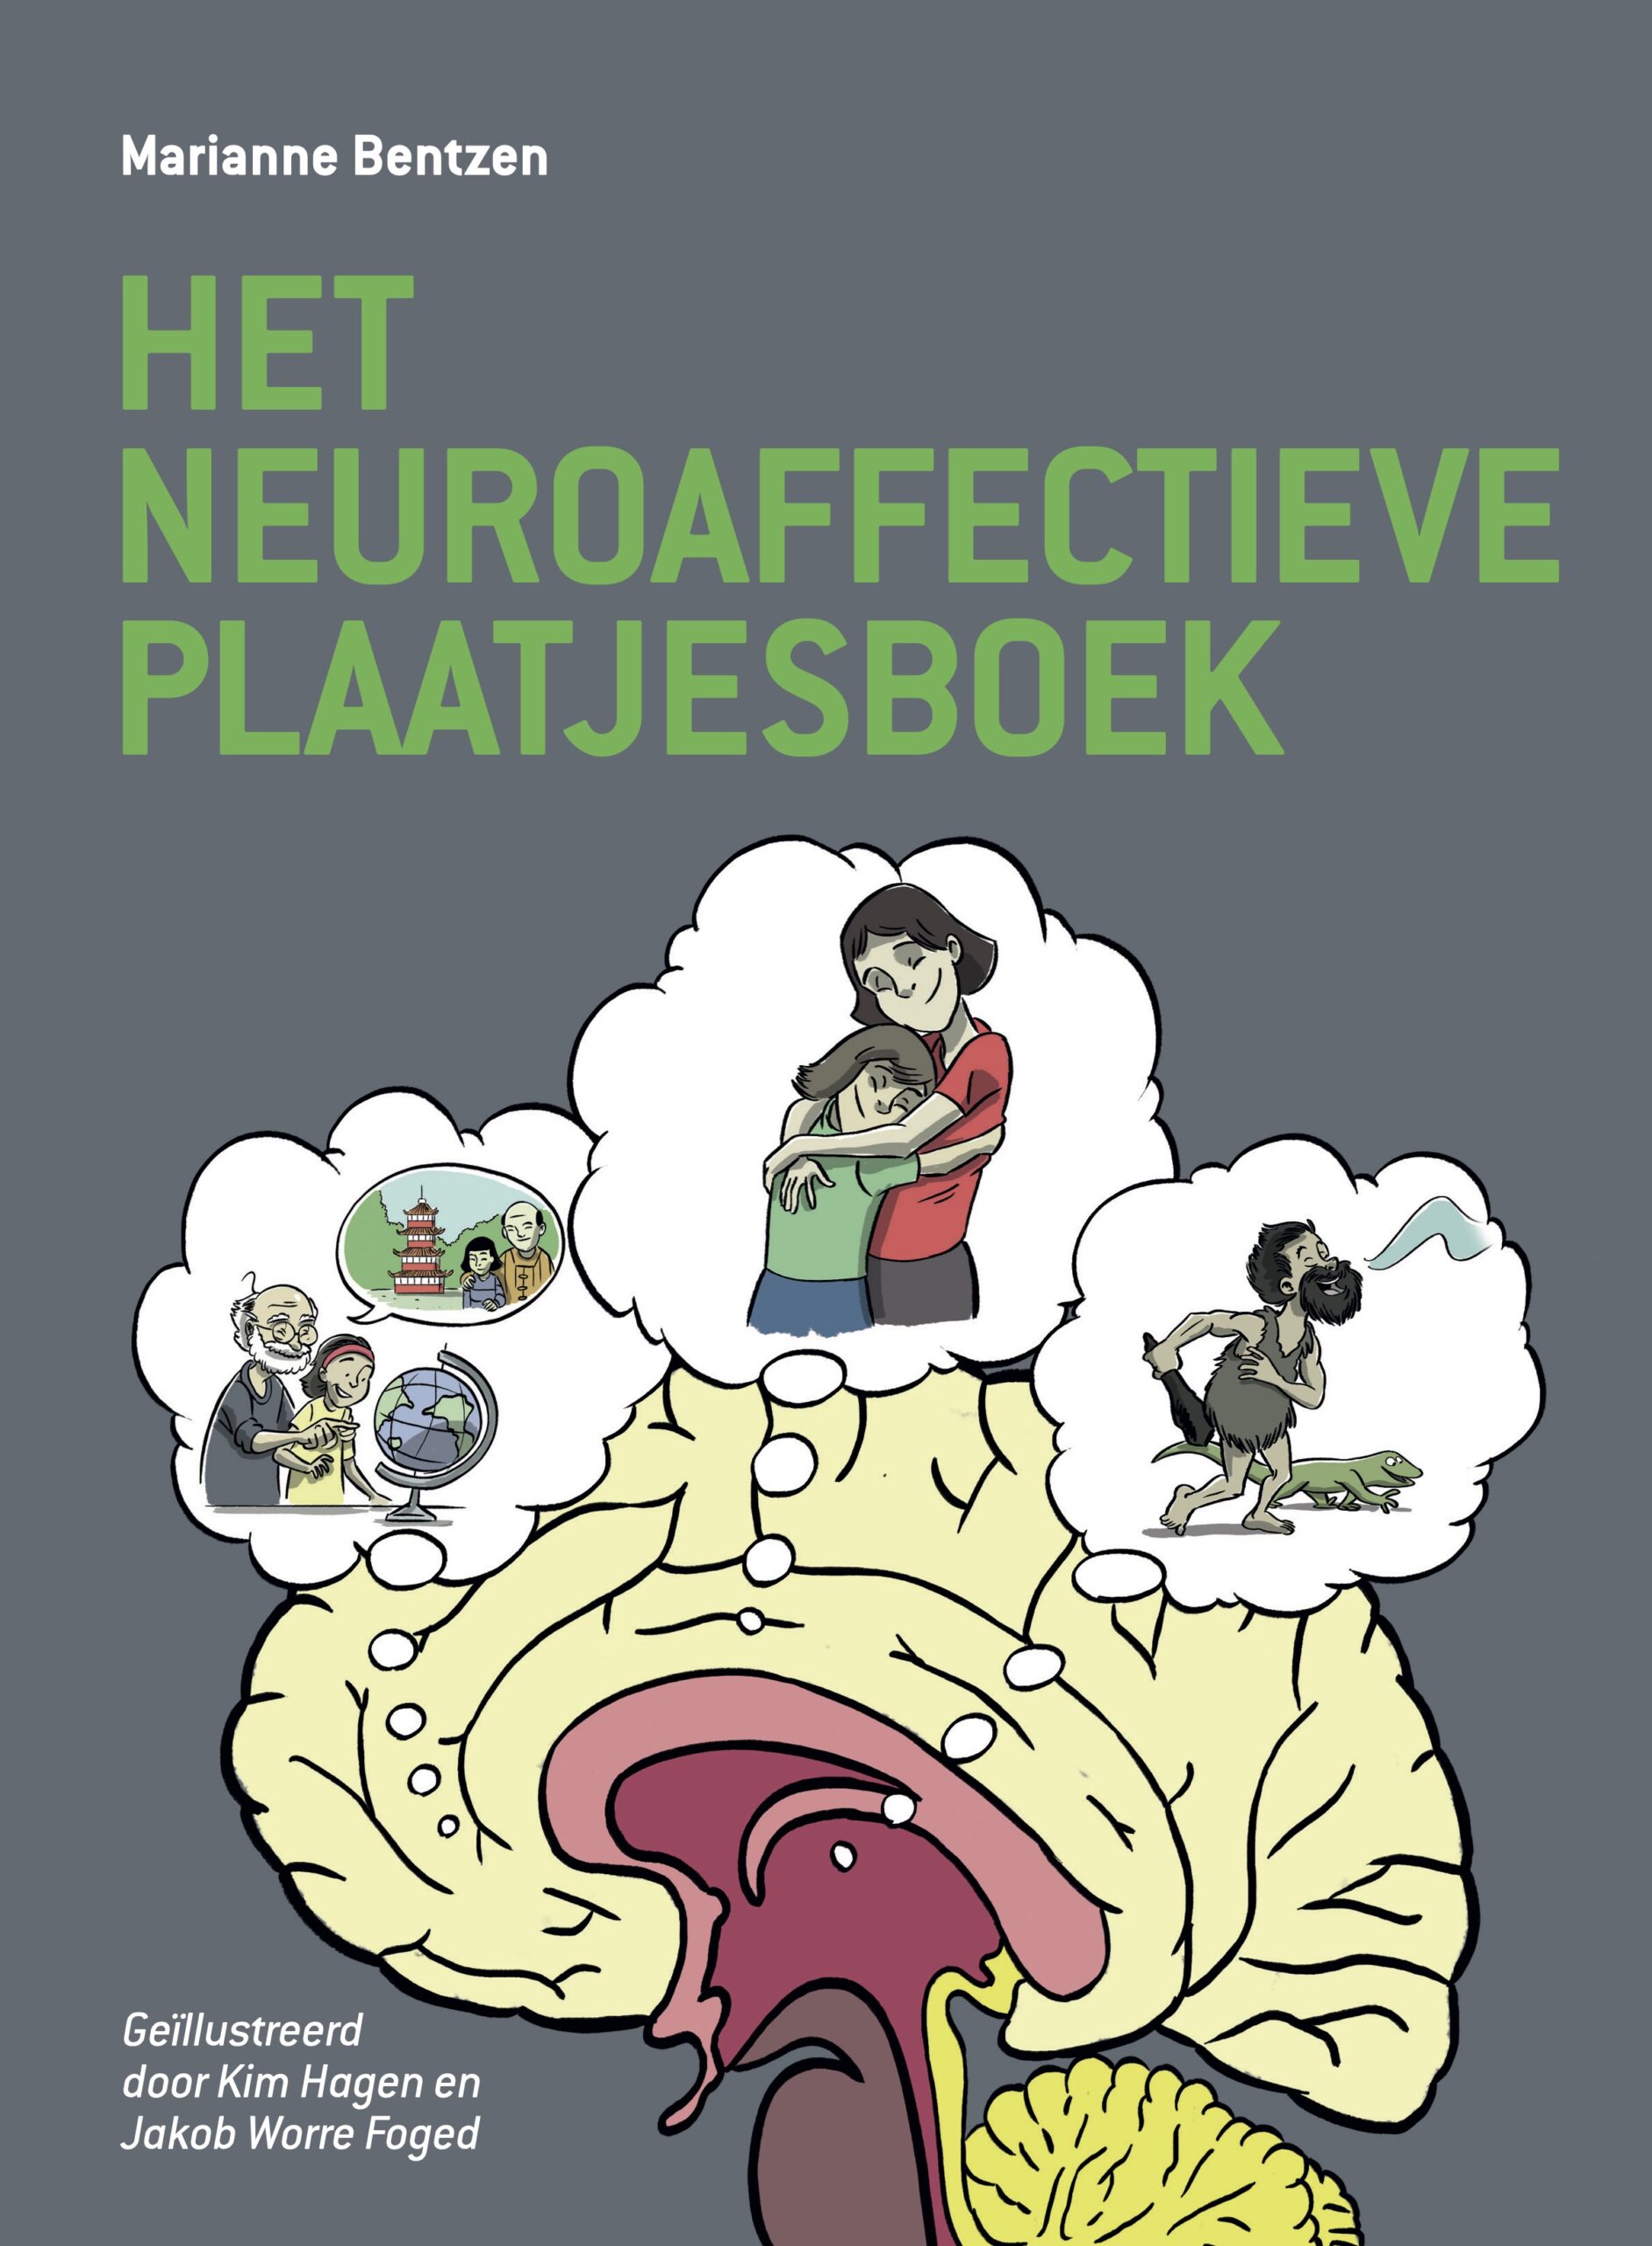 Book cover with a Dutch title